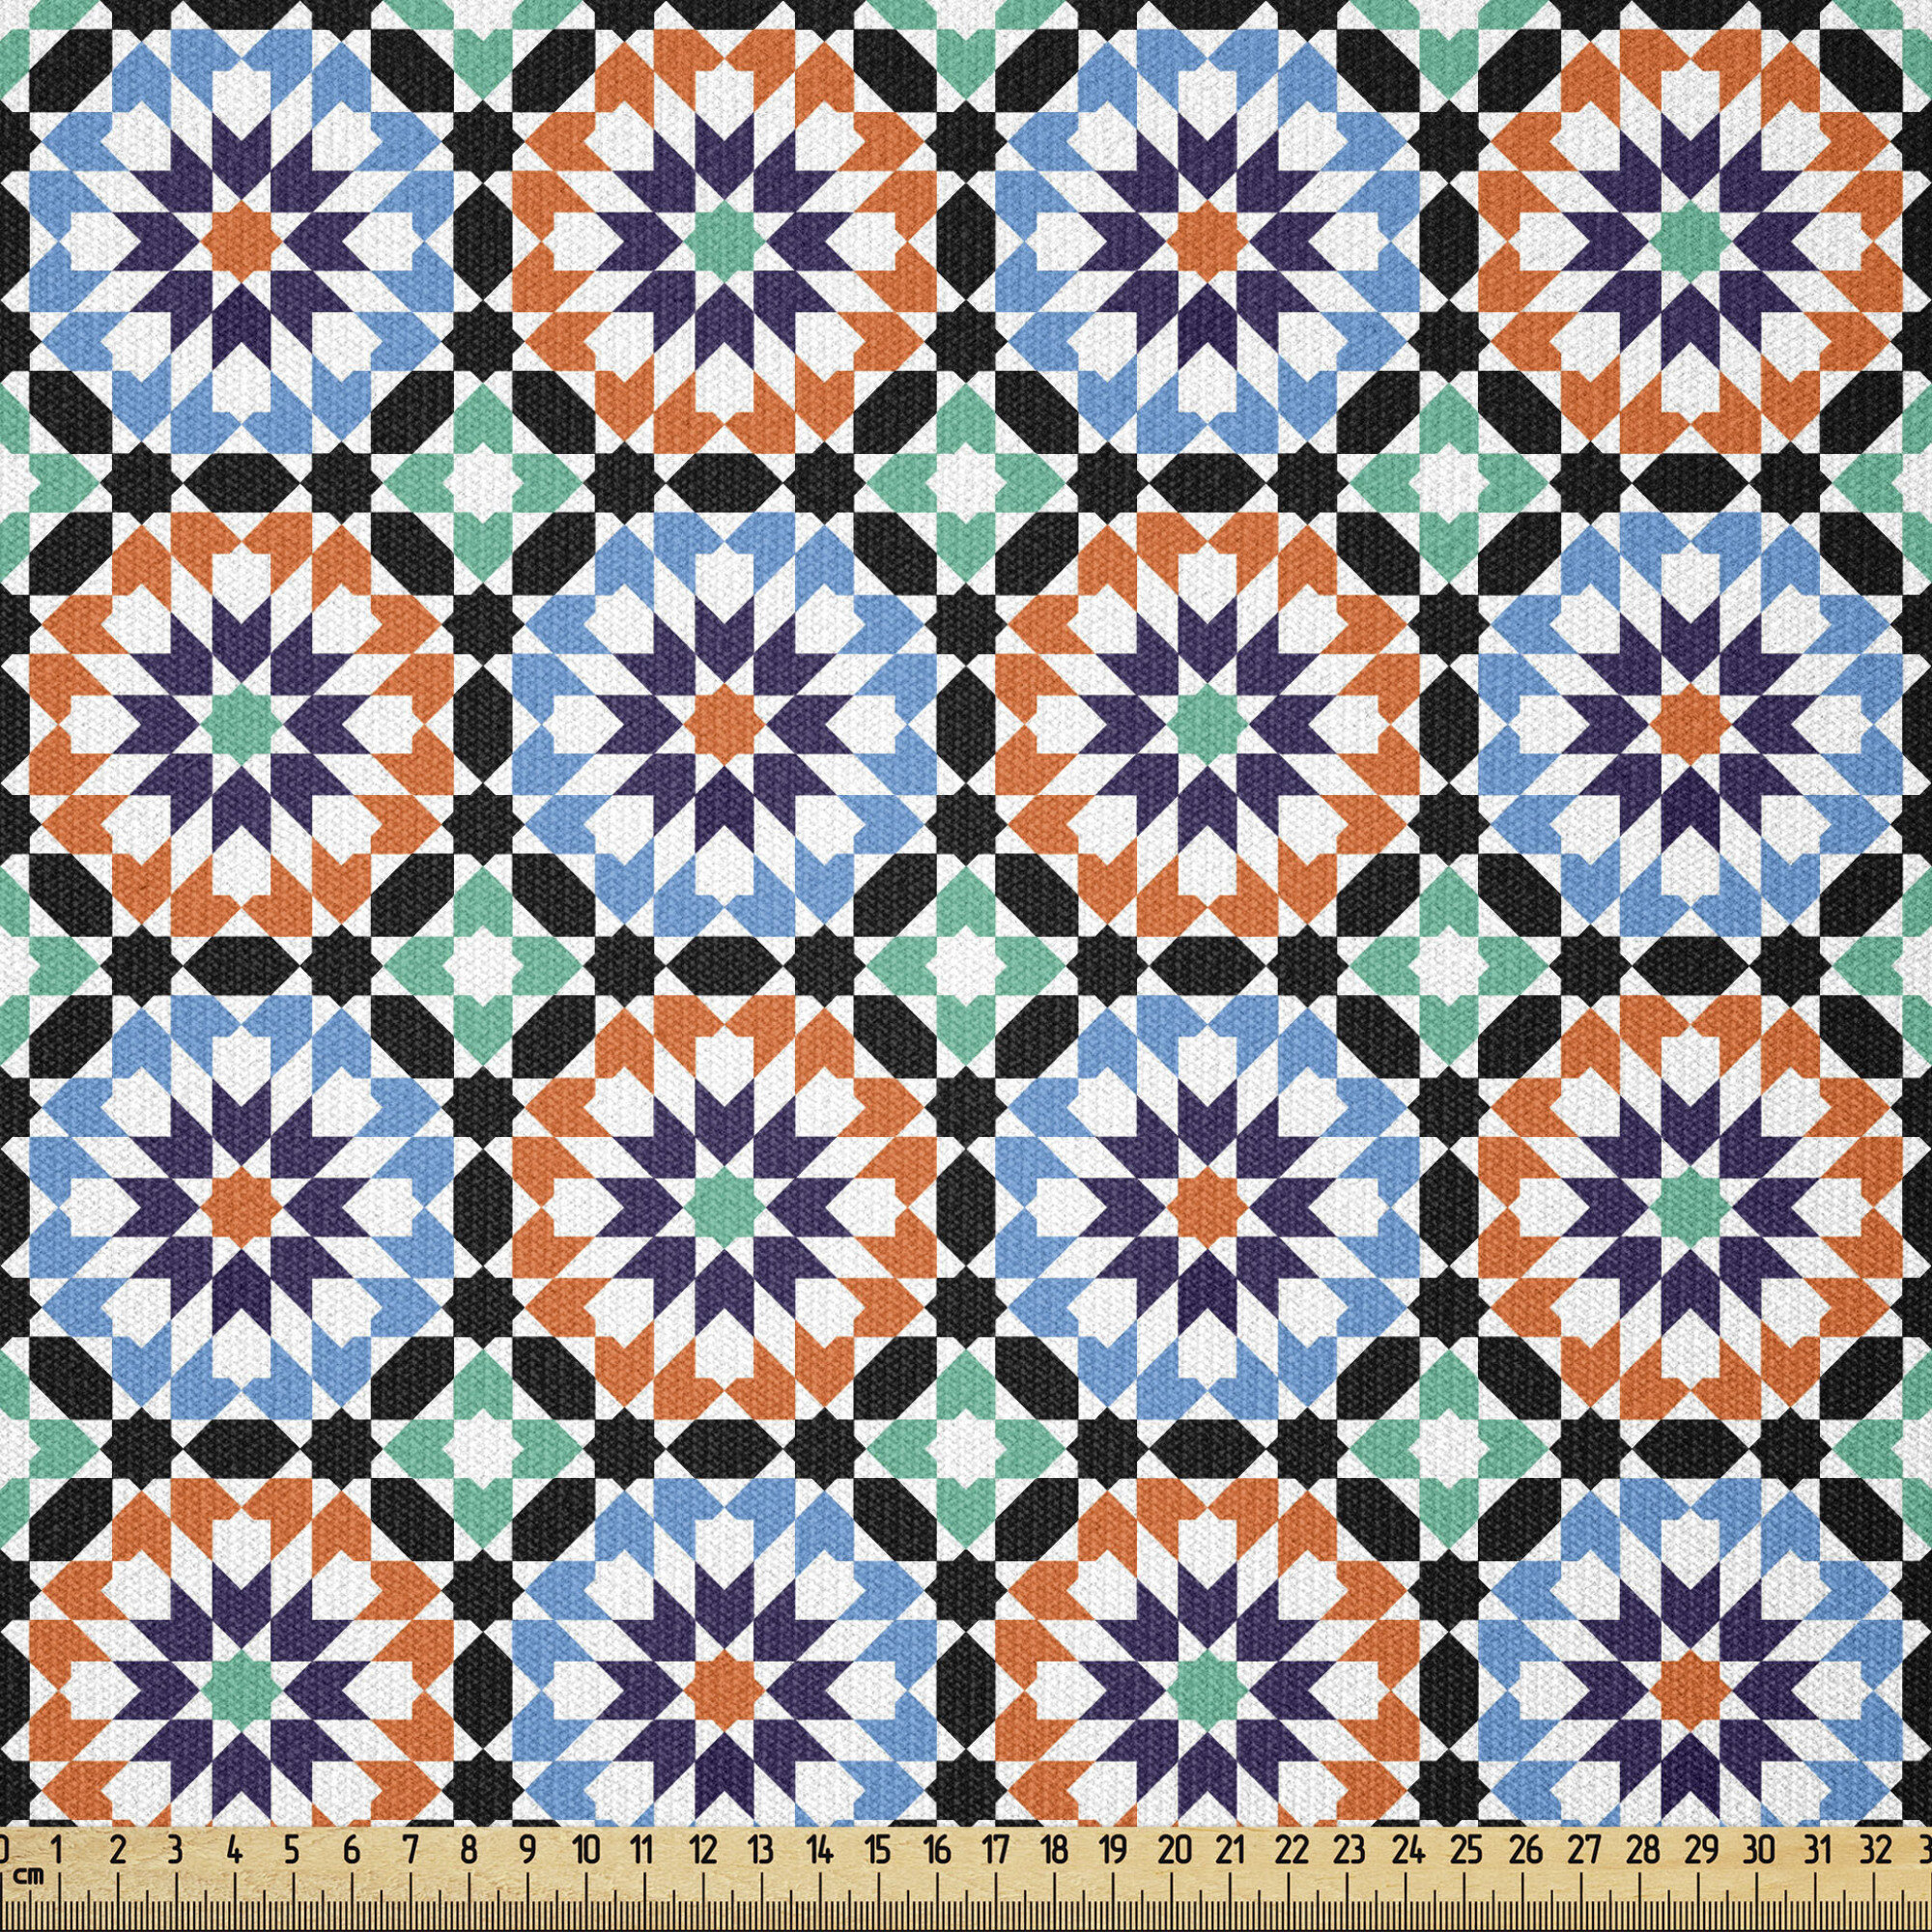  Ambesonne Vintage Fabric by The Yard, Moroccan Ceramic Tile  Inspired Floral Old Fashioned Cultural Mosaic Print, Decorative Fabric for  Upholstery and Home Accents, Blue Orange : Arts, Crafts & Sewing